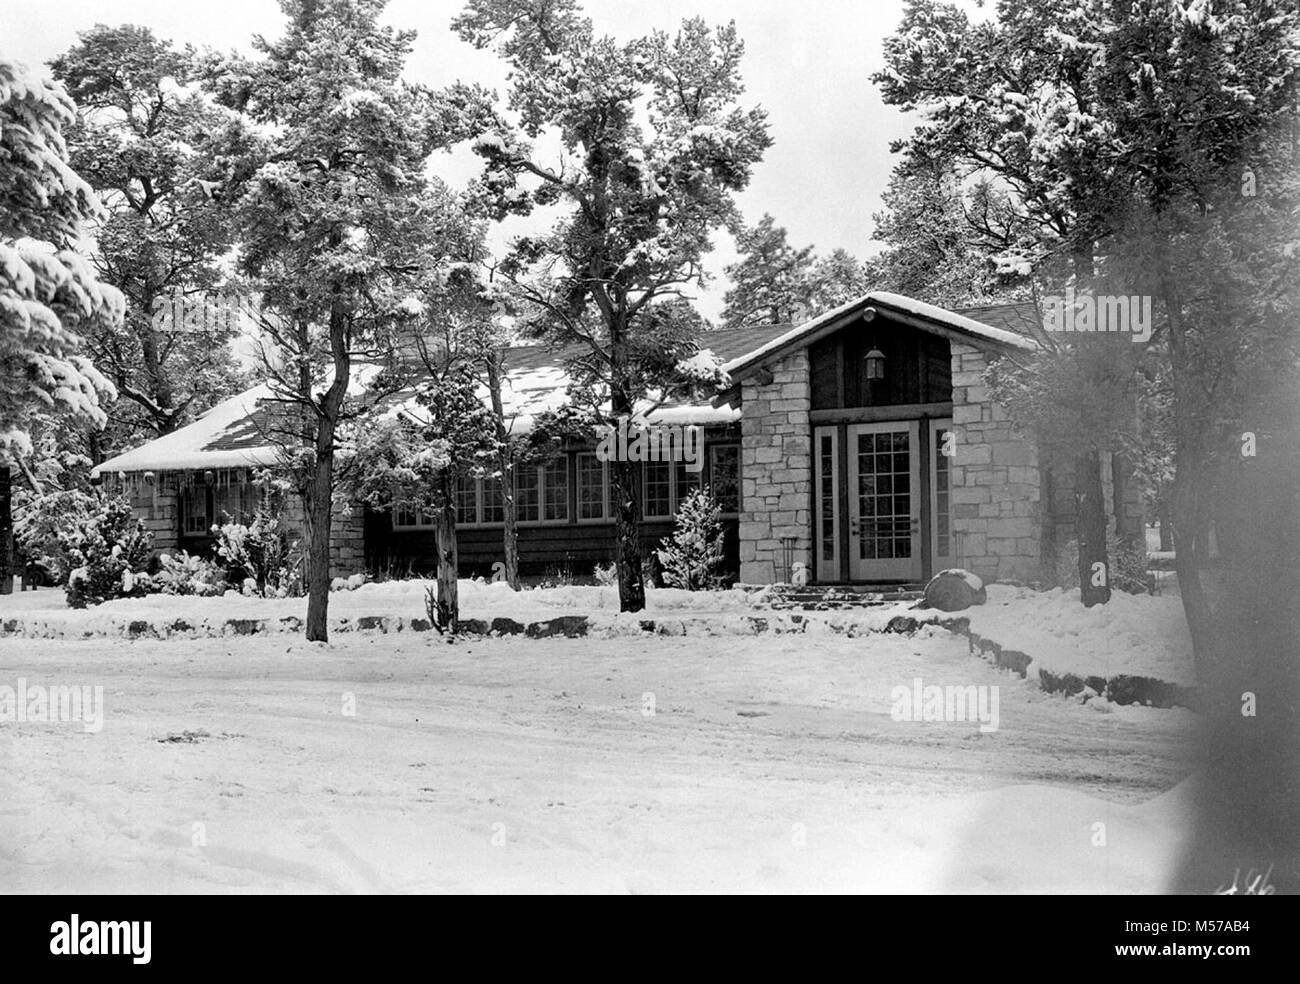 Grand Canyon Old Cameron Hotel and Post Office . FRONT ENTRANCE TO DEL WEB POST OFFICE BUILDING IN SNOW, NOW THE MAGISTRATE'S OFFICE.  FEB. 17, 1936.  . Stock Photo